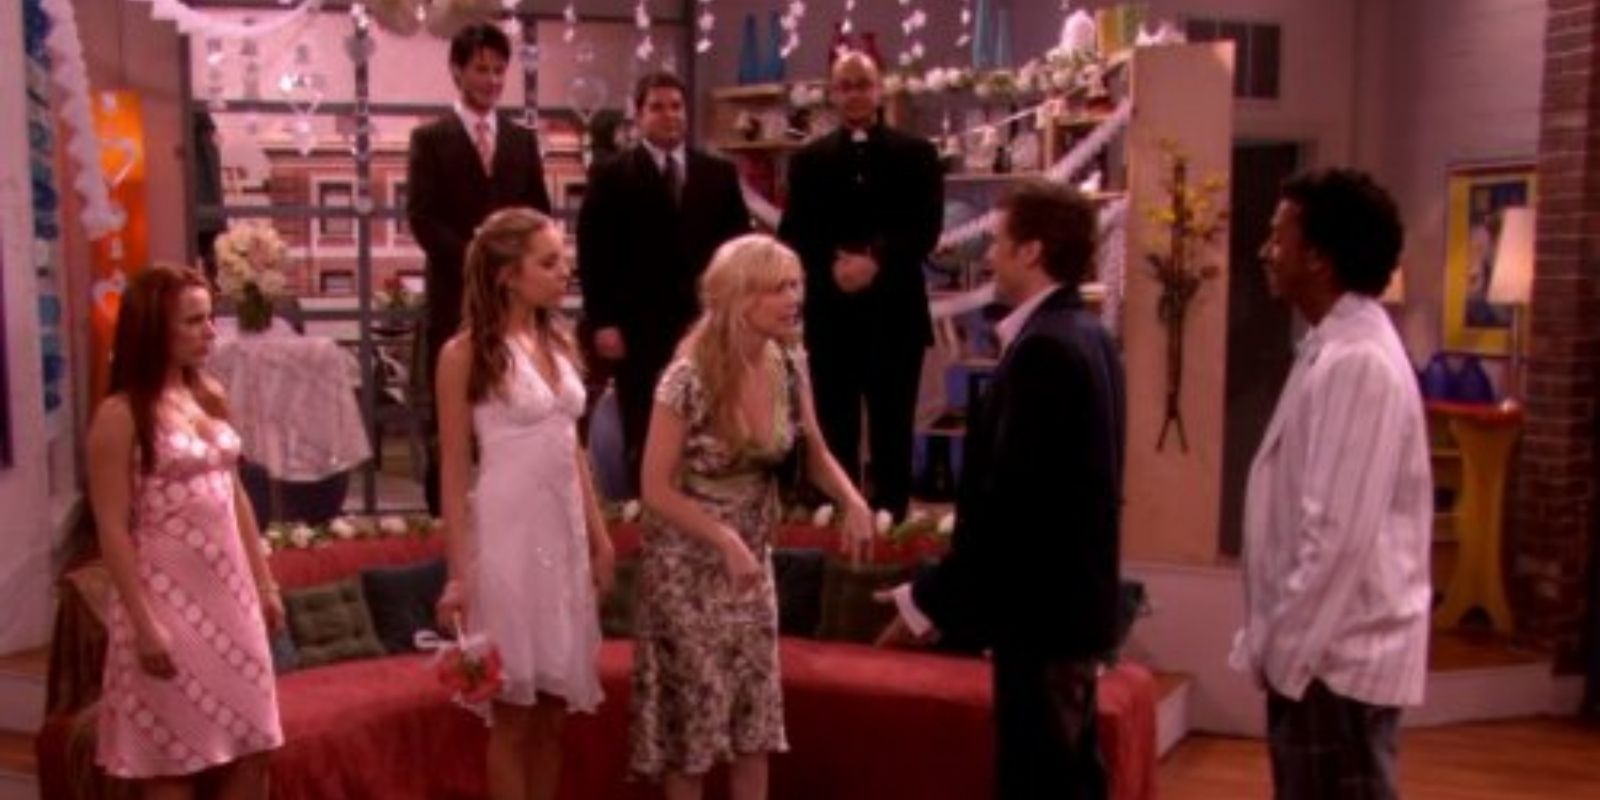 The group of friends take part in a fake wedding as a prank in What I Like About You